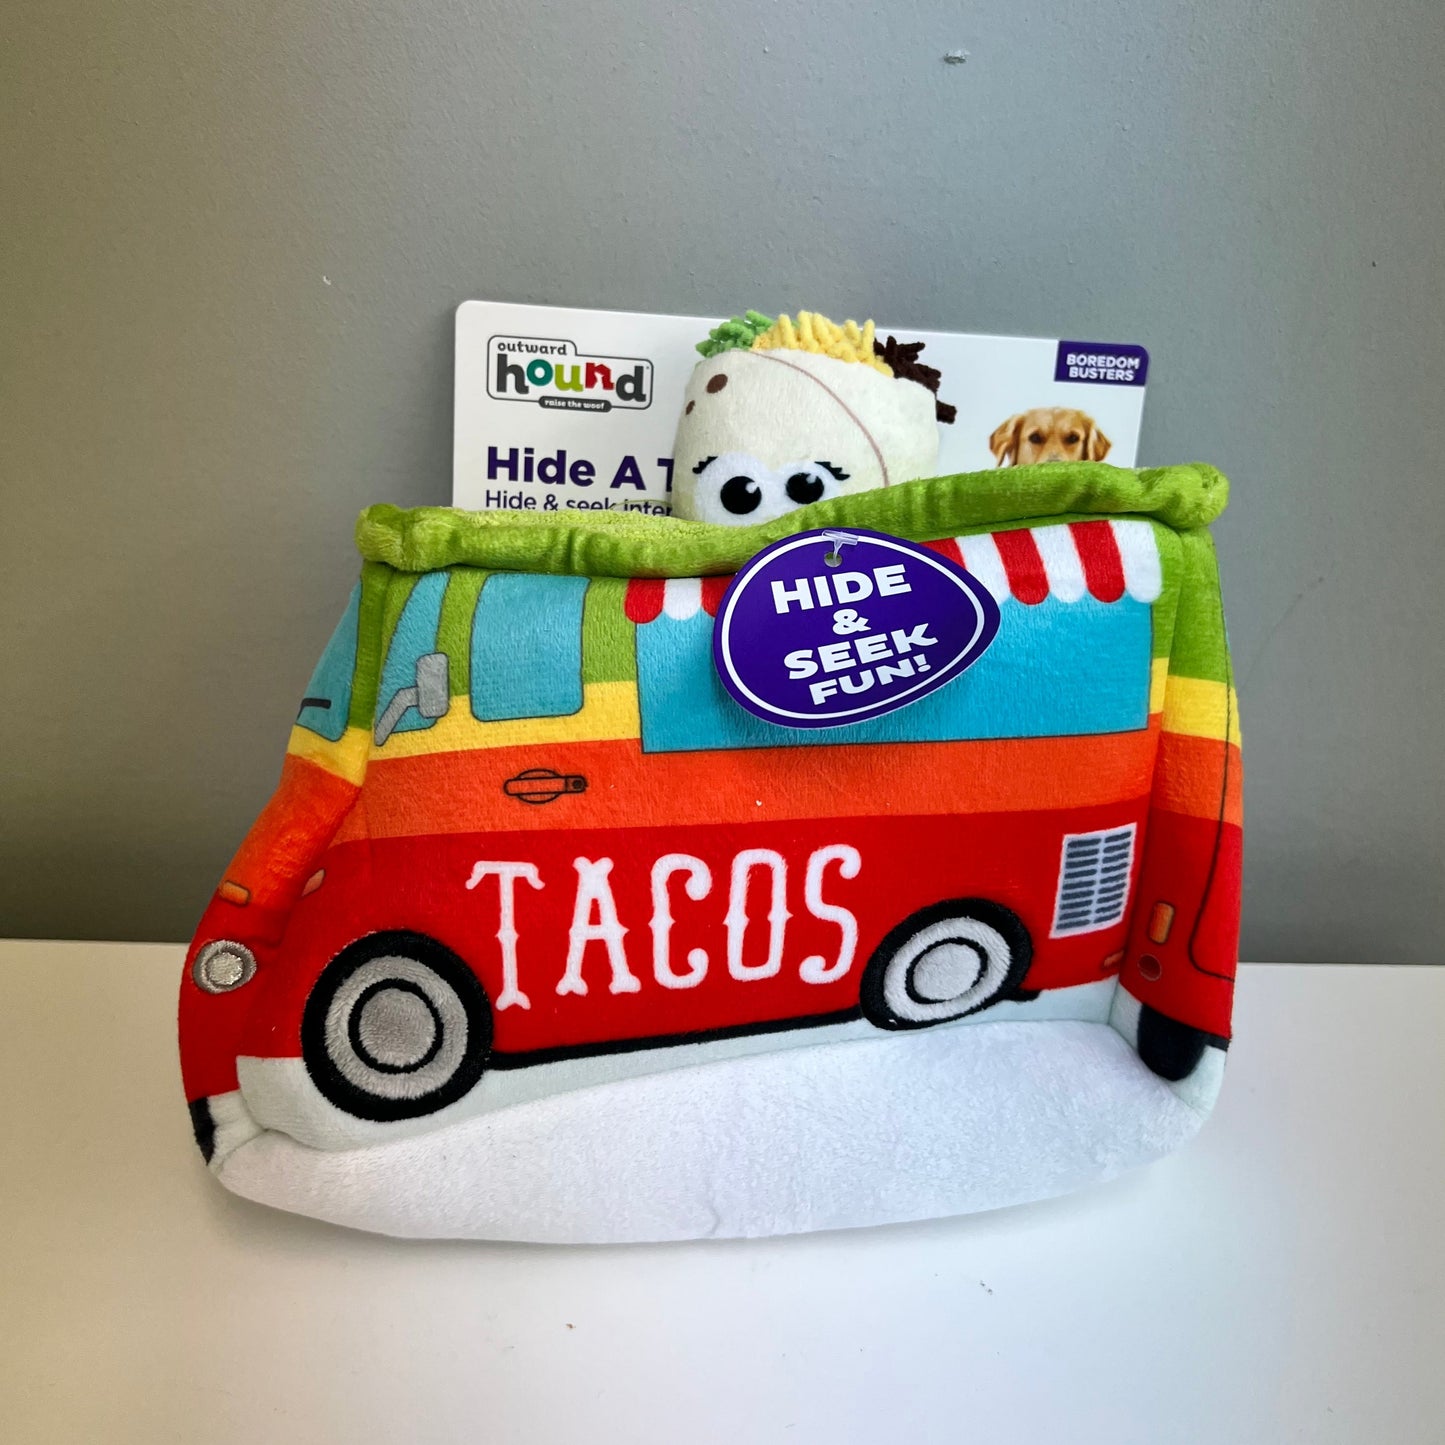 Outward Hound Hide A Taco Truck Puzzle Toy